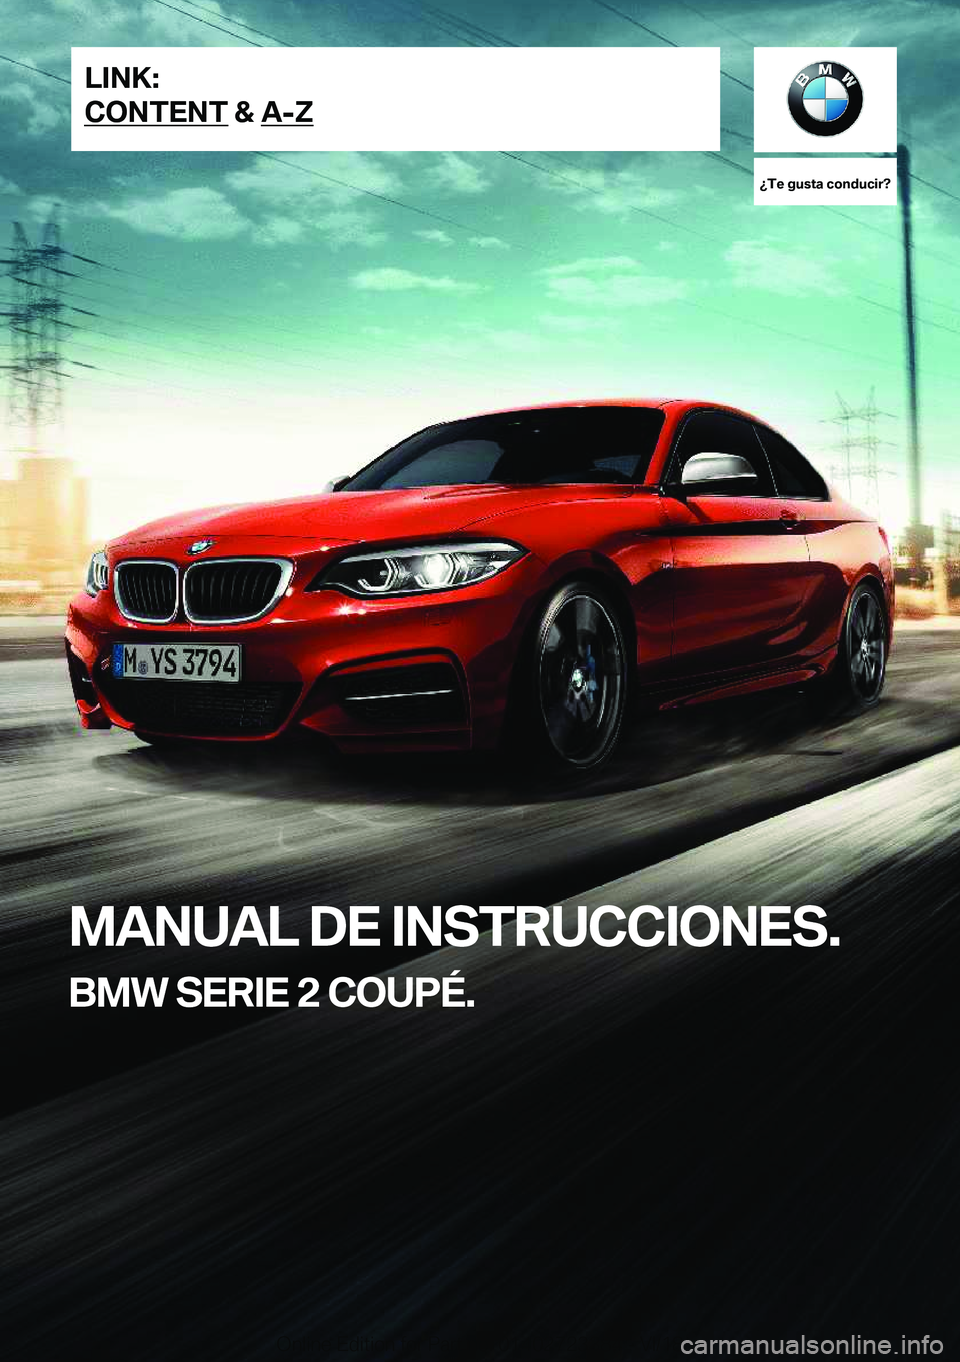 BMW 2 SERIES COUPE 2019  Manuales de Empleo (in Spanish) ��T�e��g�u�s�t�a��c�o�n�d�u�c�i�r� 
�M�A�N�U�A�L��D�E��I�N�S�T�R�U�C�C�I�O�N�E�S�.
�B�M�W��S�E�R�I�E��2��C�O�U�P�